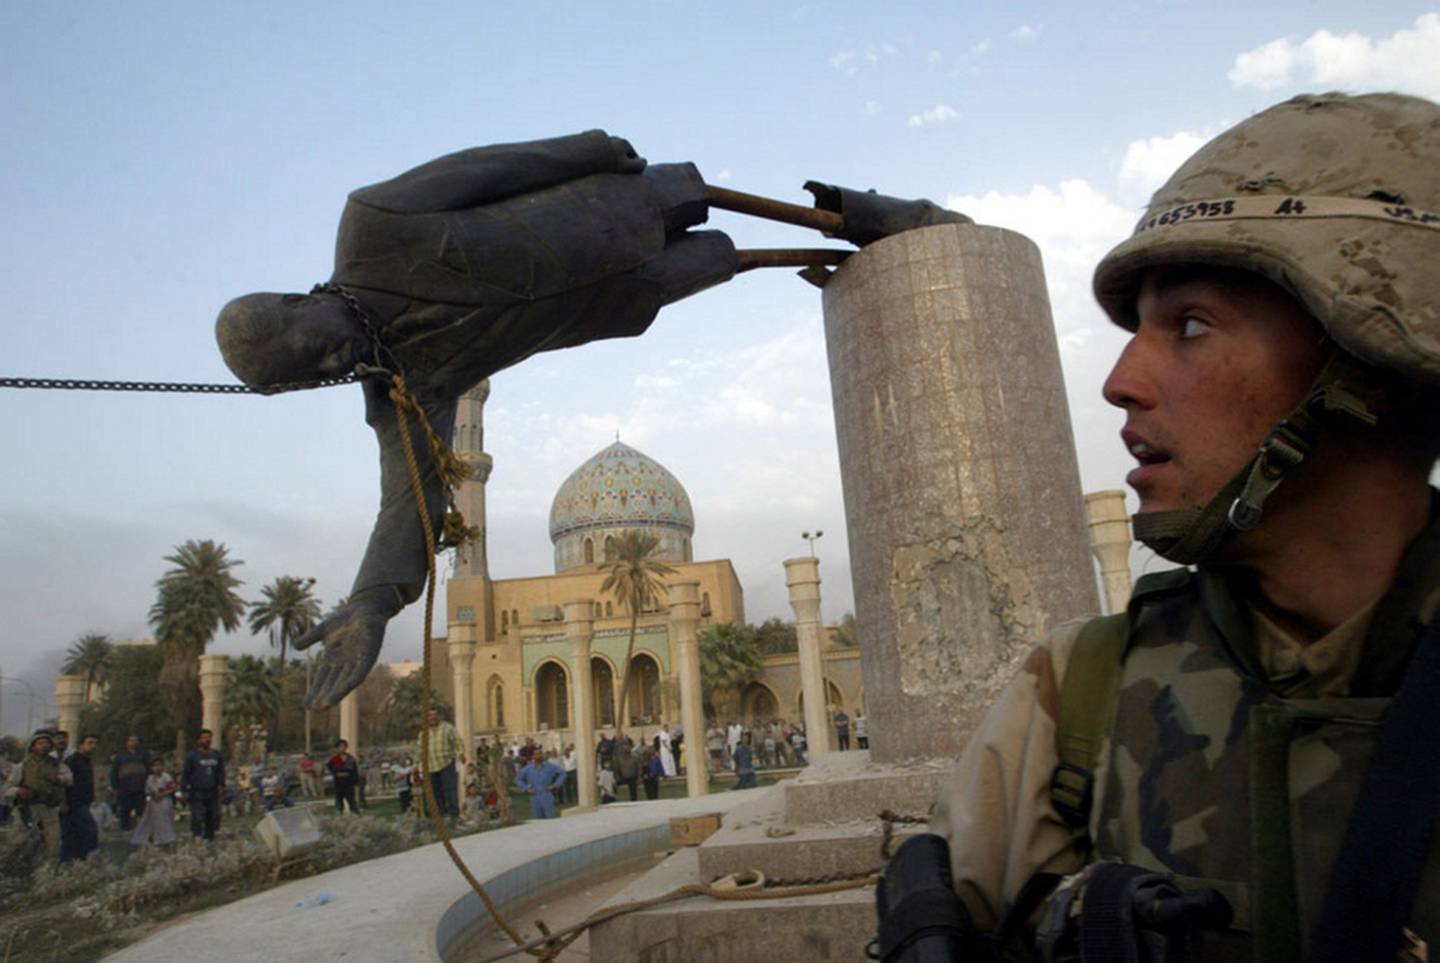 Kirk Dalrymple of the US Marine Corps watches as a statue of Saddam Hussein is torn down in central Baghdad on April 9, 2003. Photo: Reuters